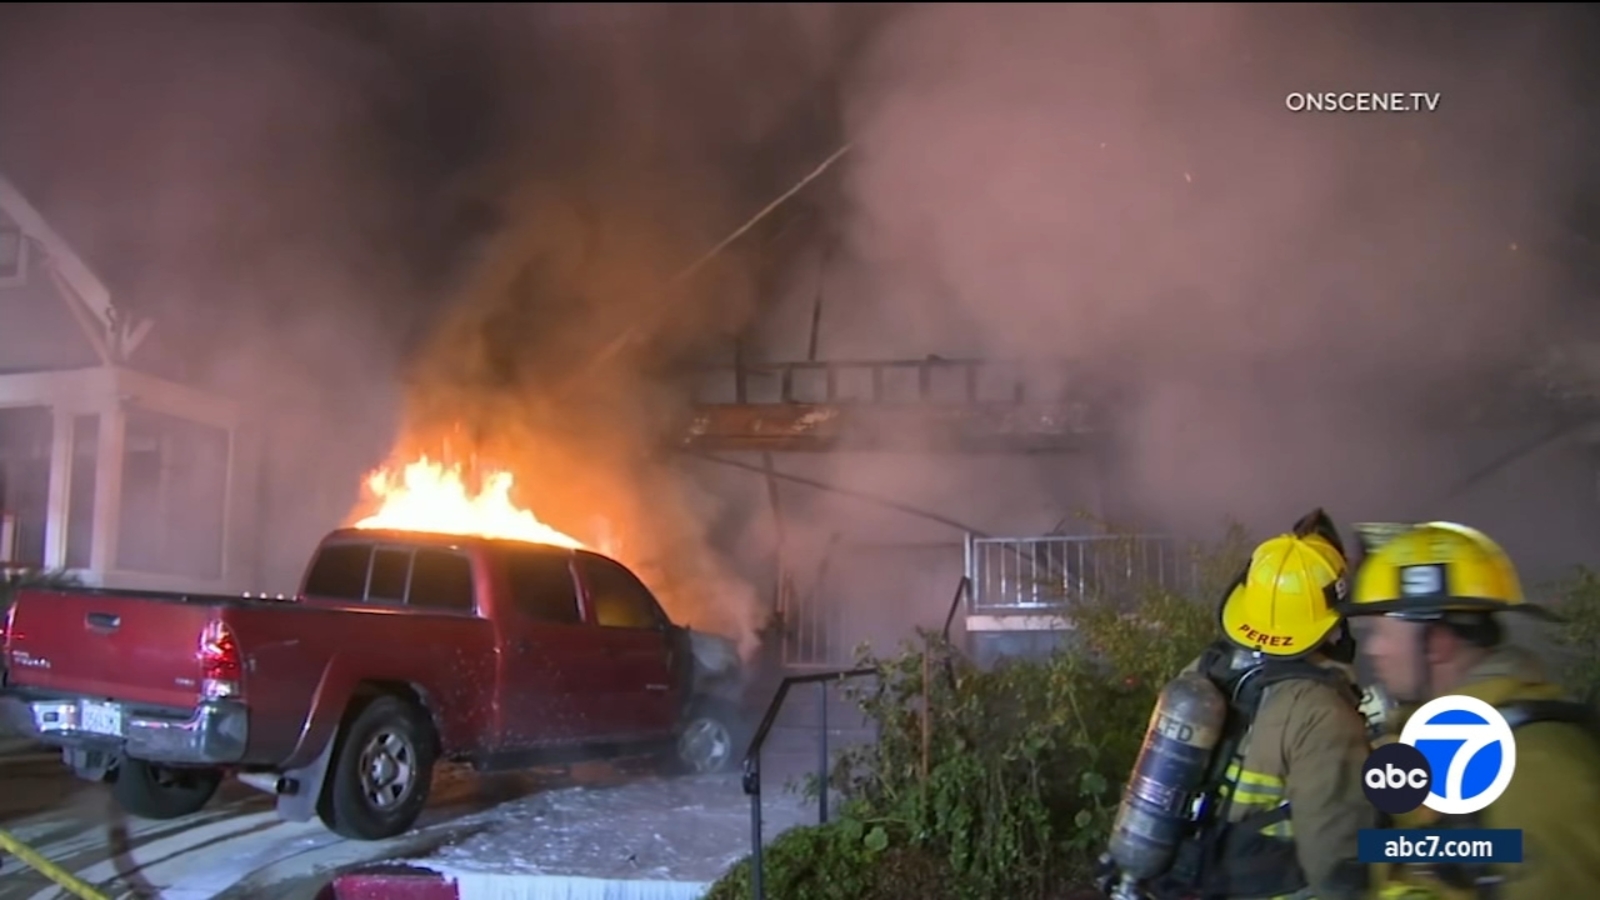 Greater Alarm Fire Engulfs Boyle Heights Apartment Complex